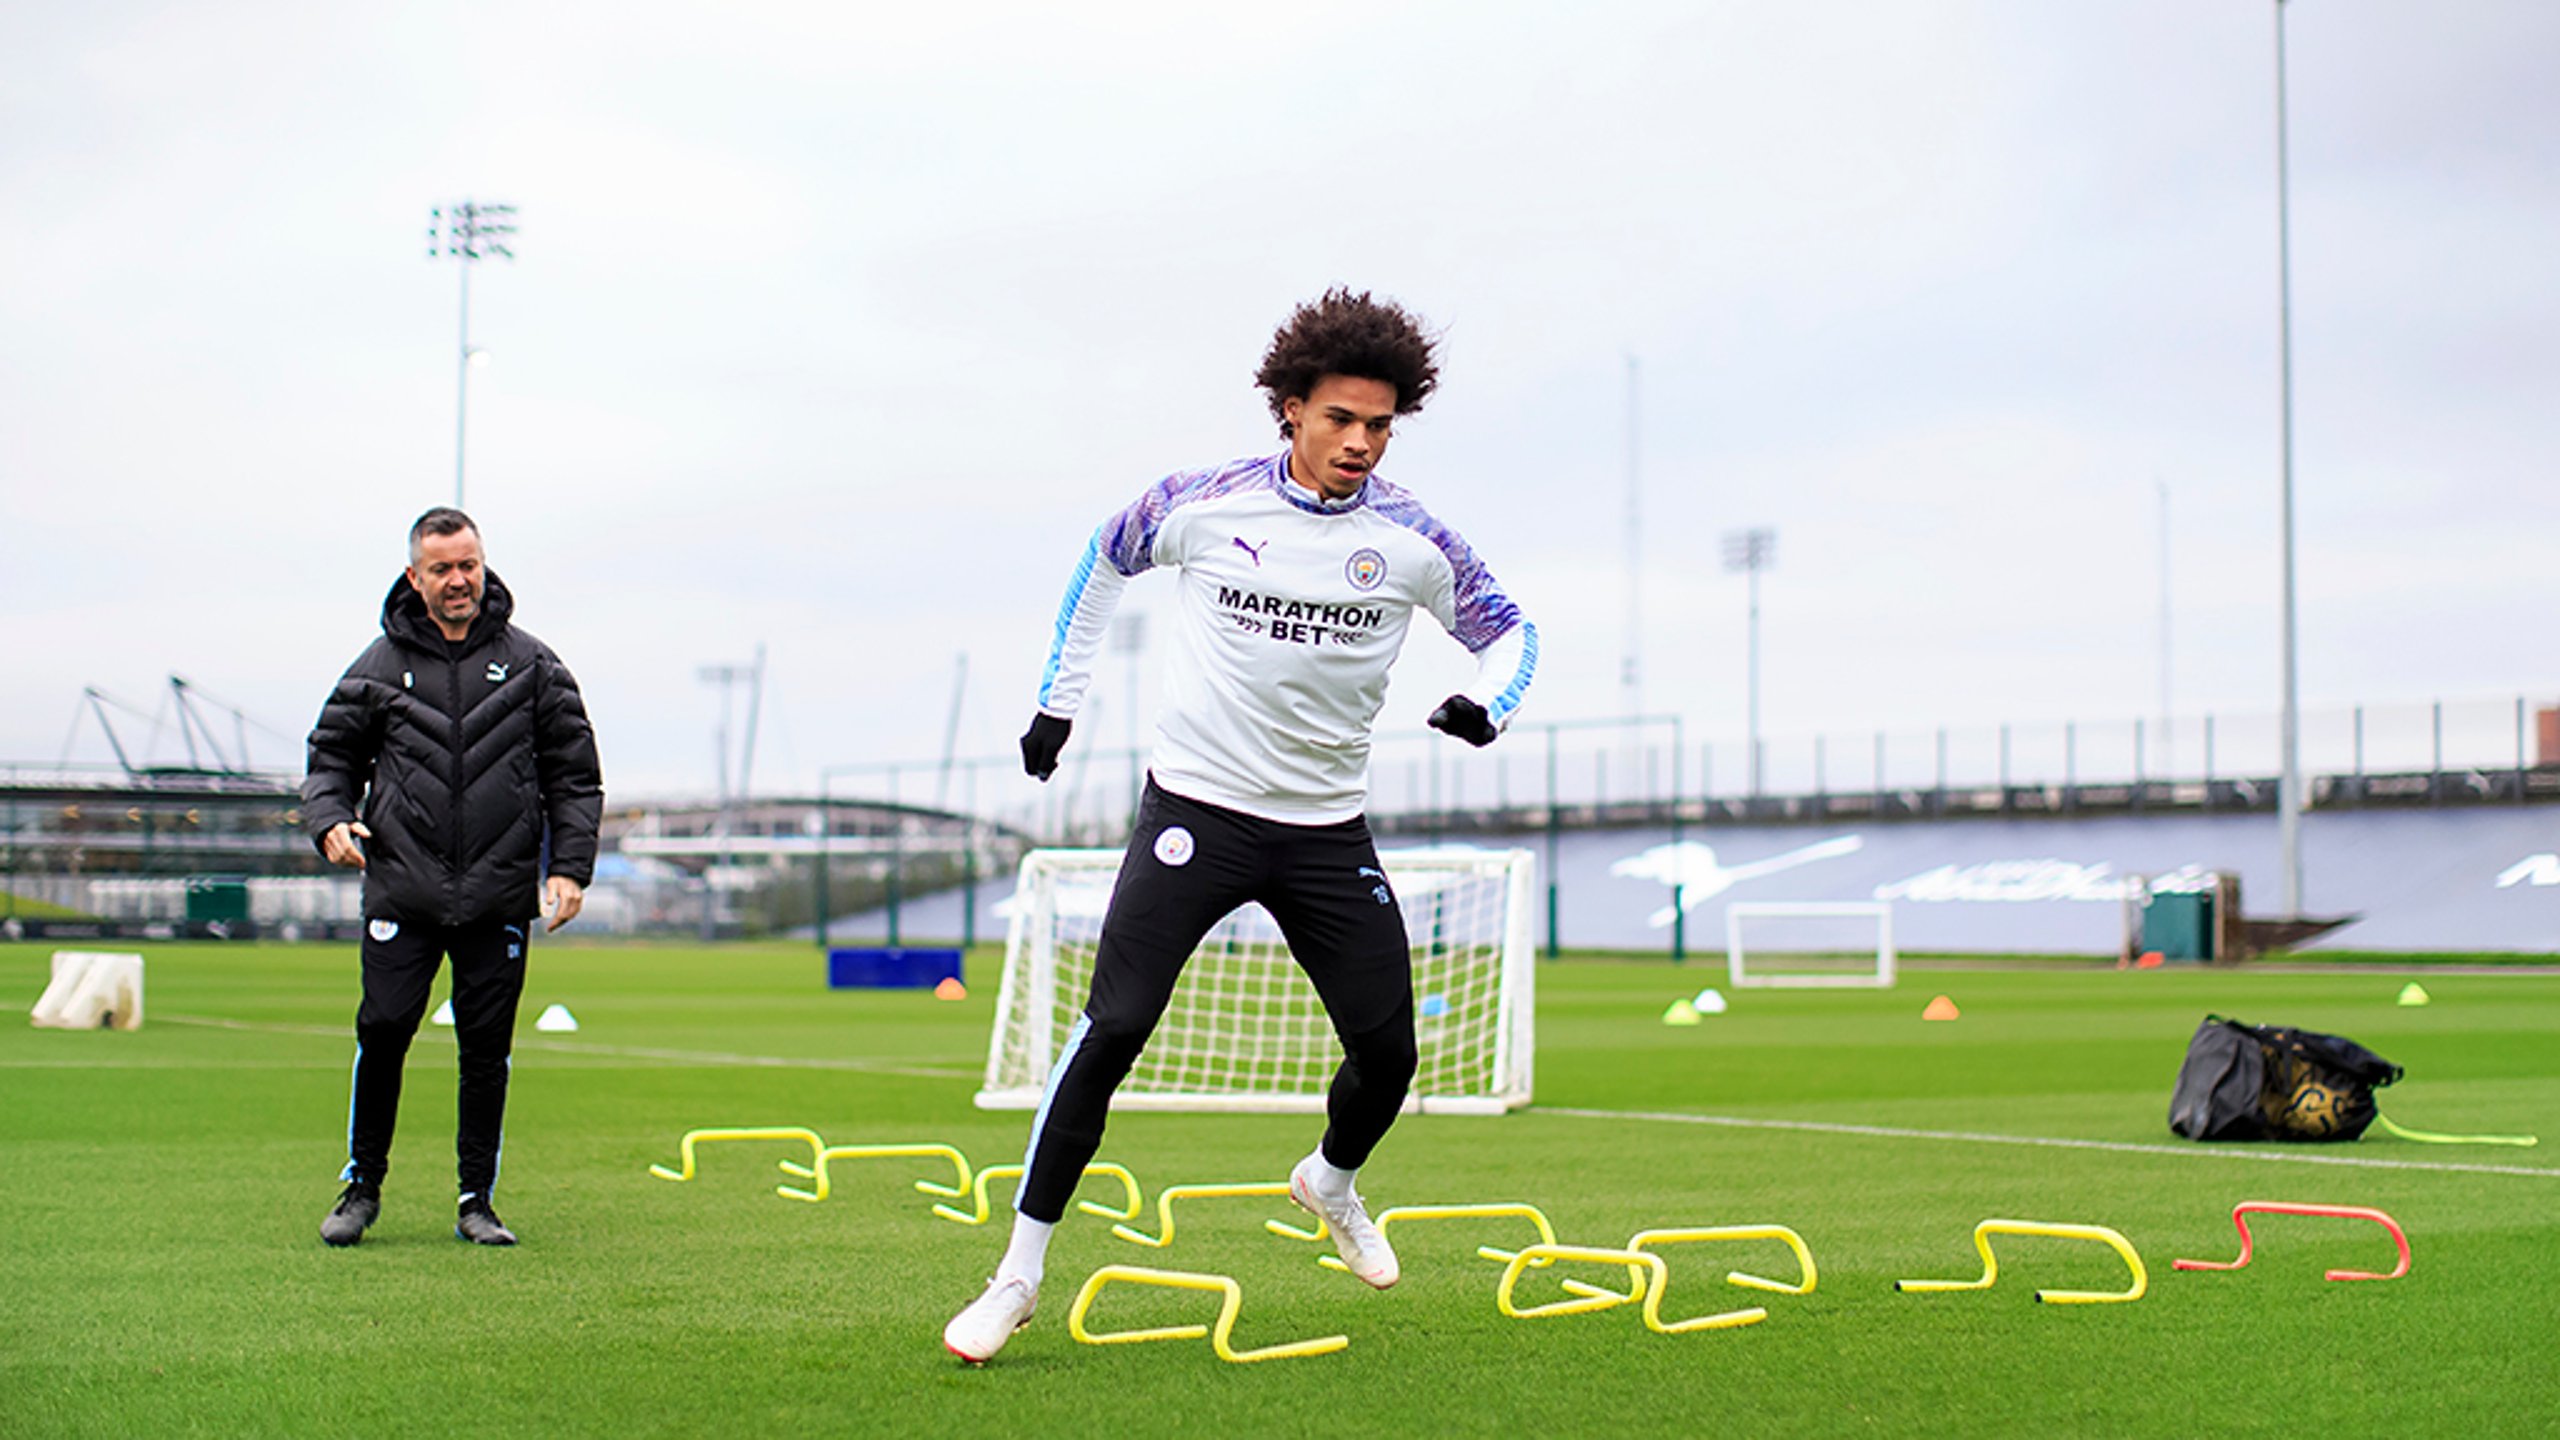  In focus: Leroy Sane on the road to recovery